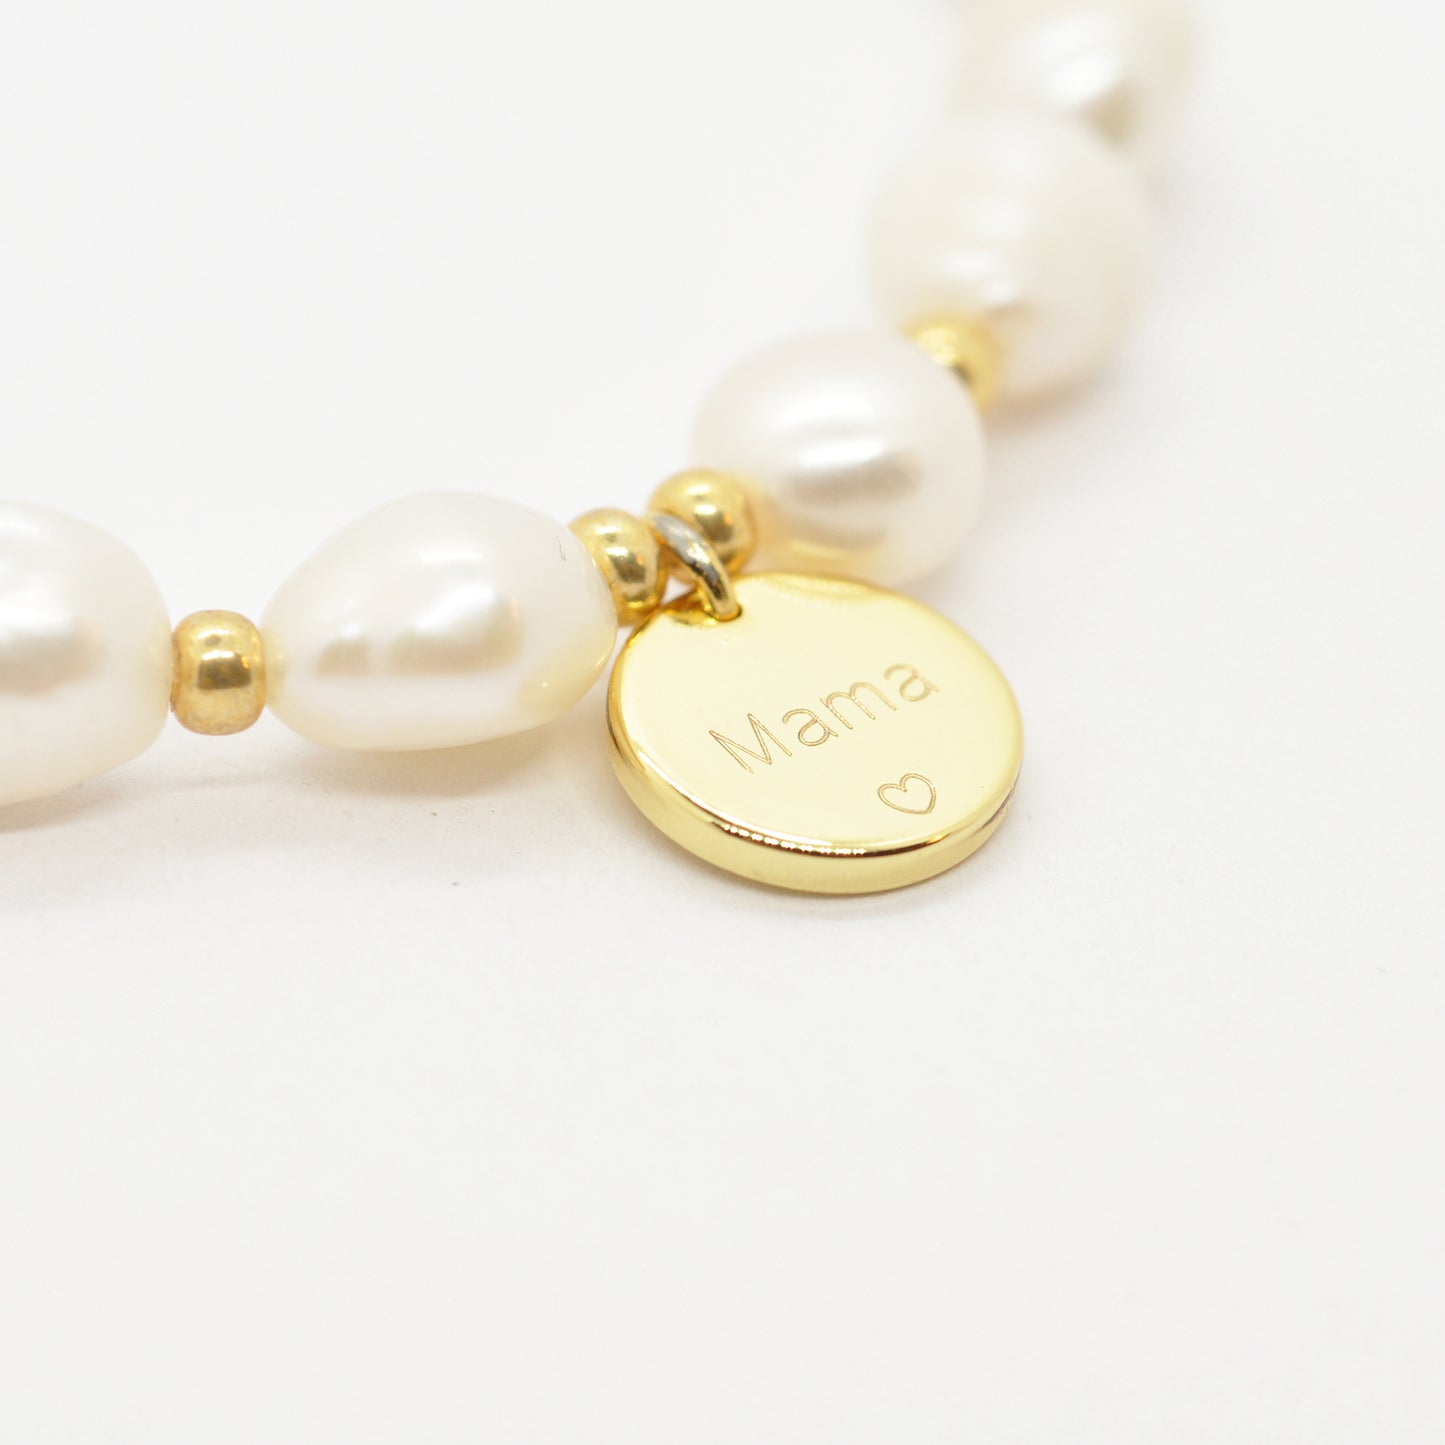 Mama bracelet with guardian angel made of freshwater pearls / stainless steel gold-plated